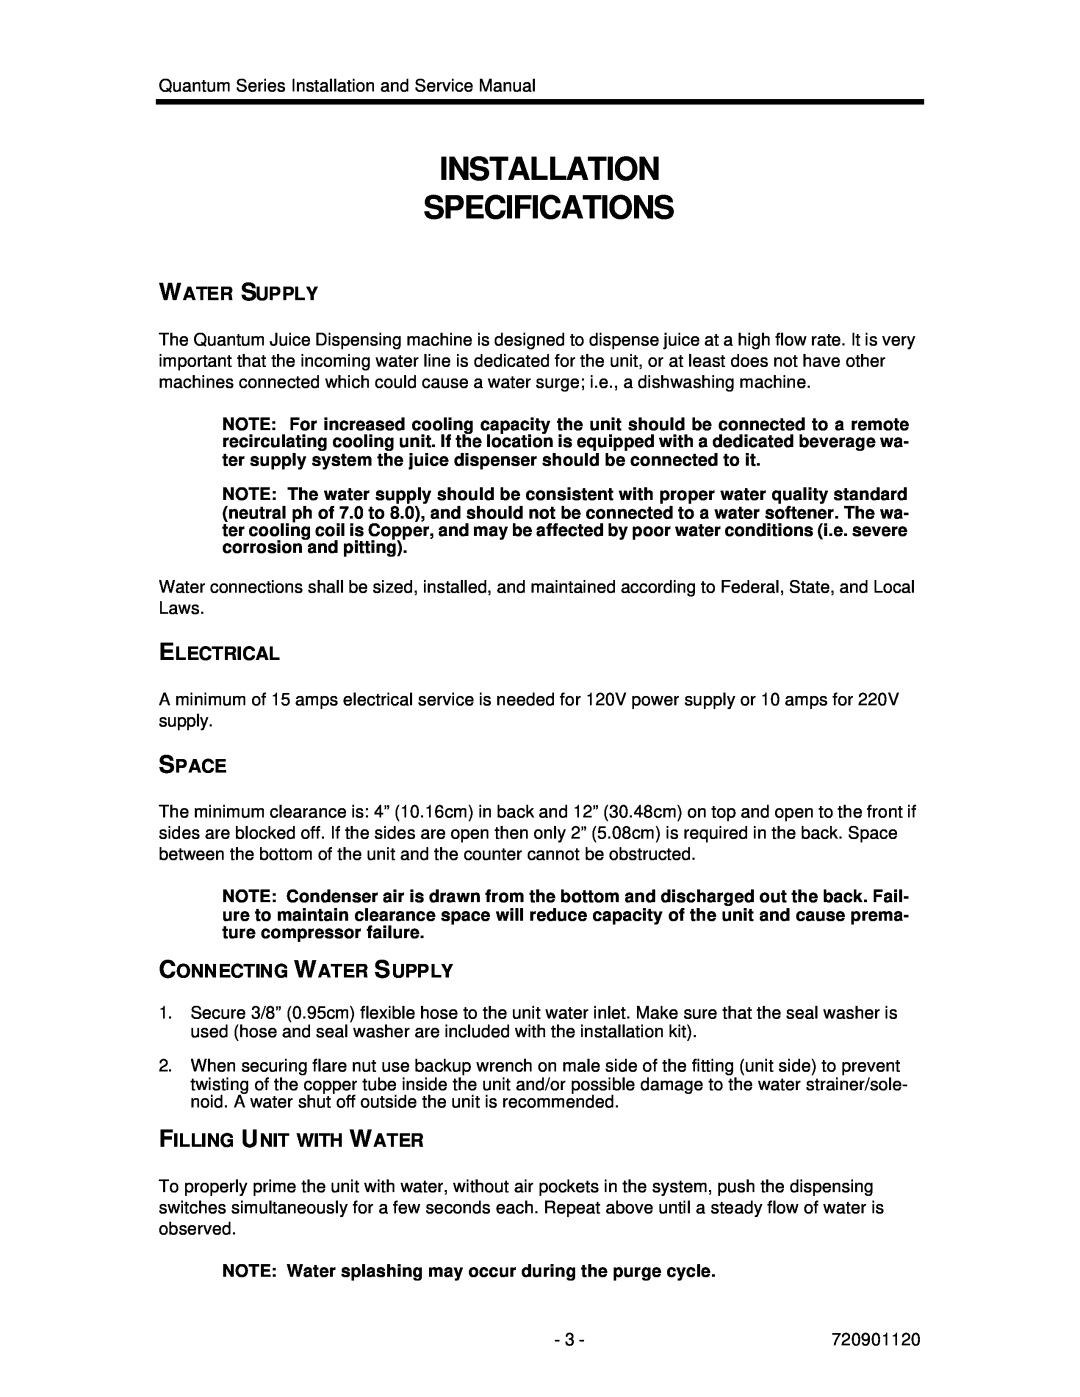 Cornelius QUANTUM SERIES service manual Installation Specifications, Electrical, Space, Connecting Water Supply 